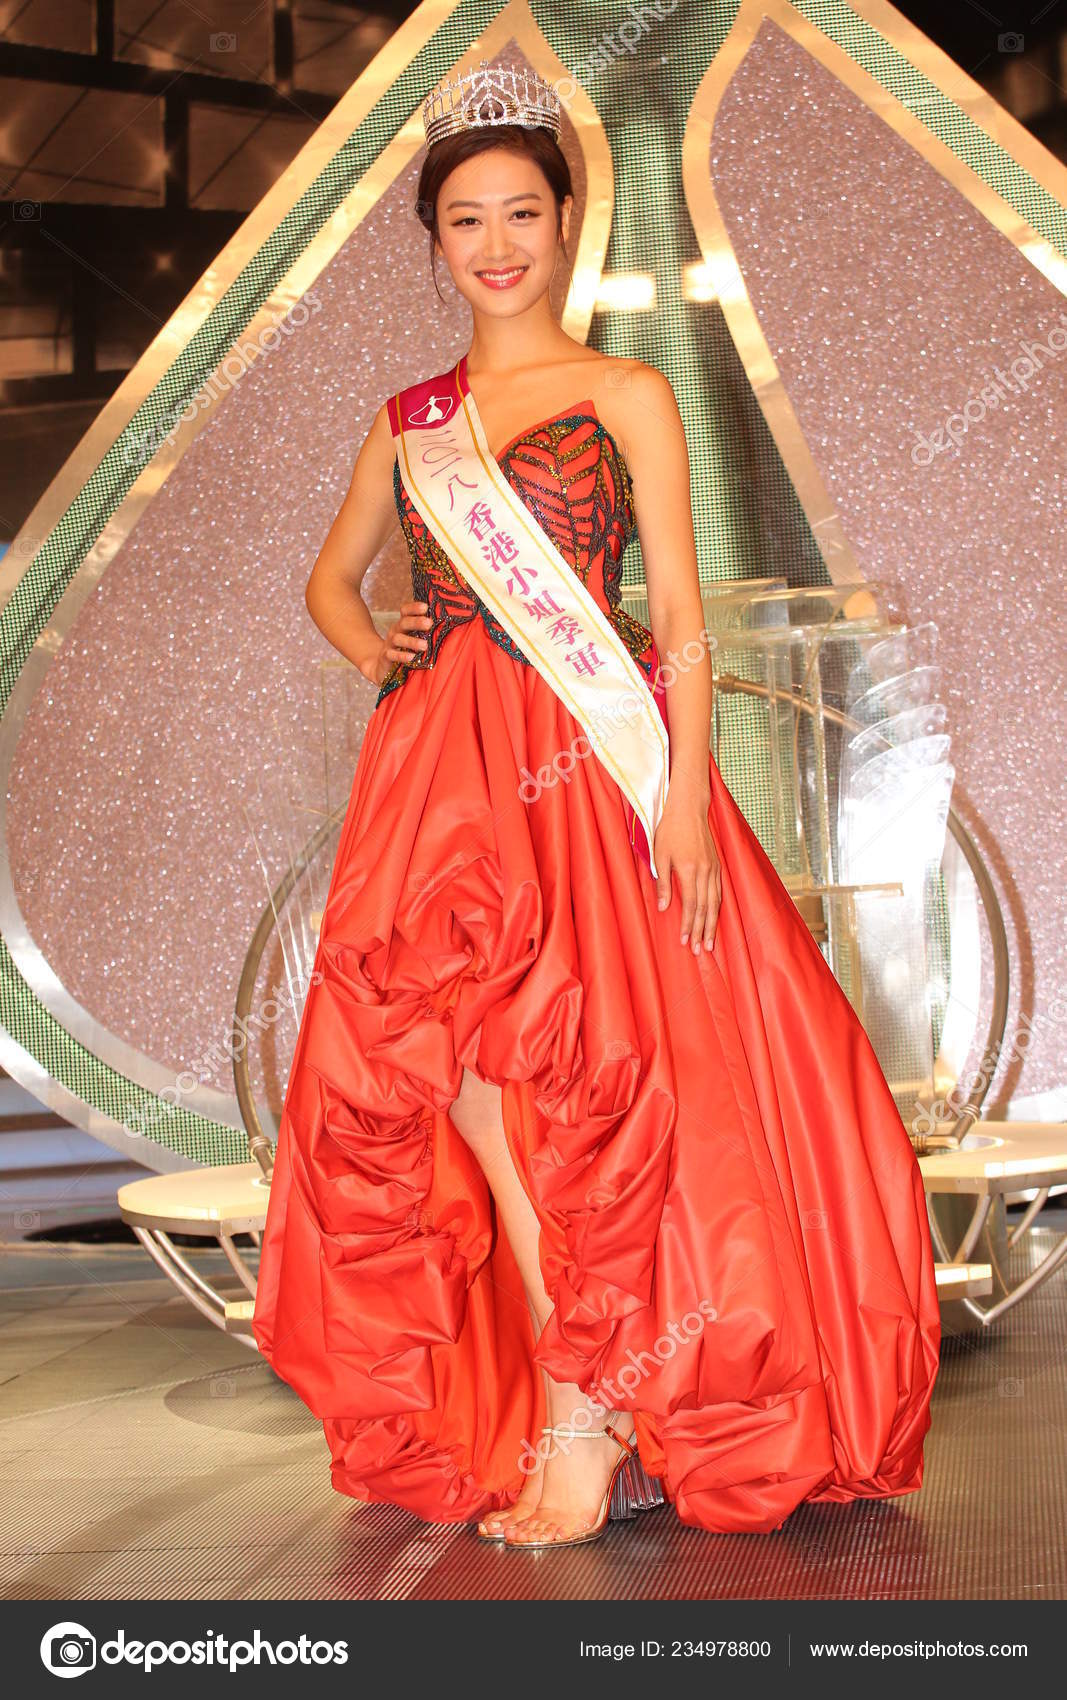 Tampa Bay teen enters beauty pageant to 'inspire others.'